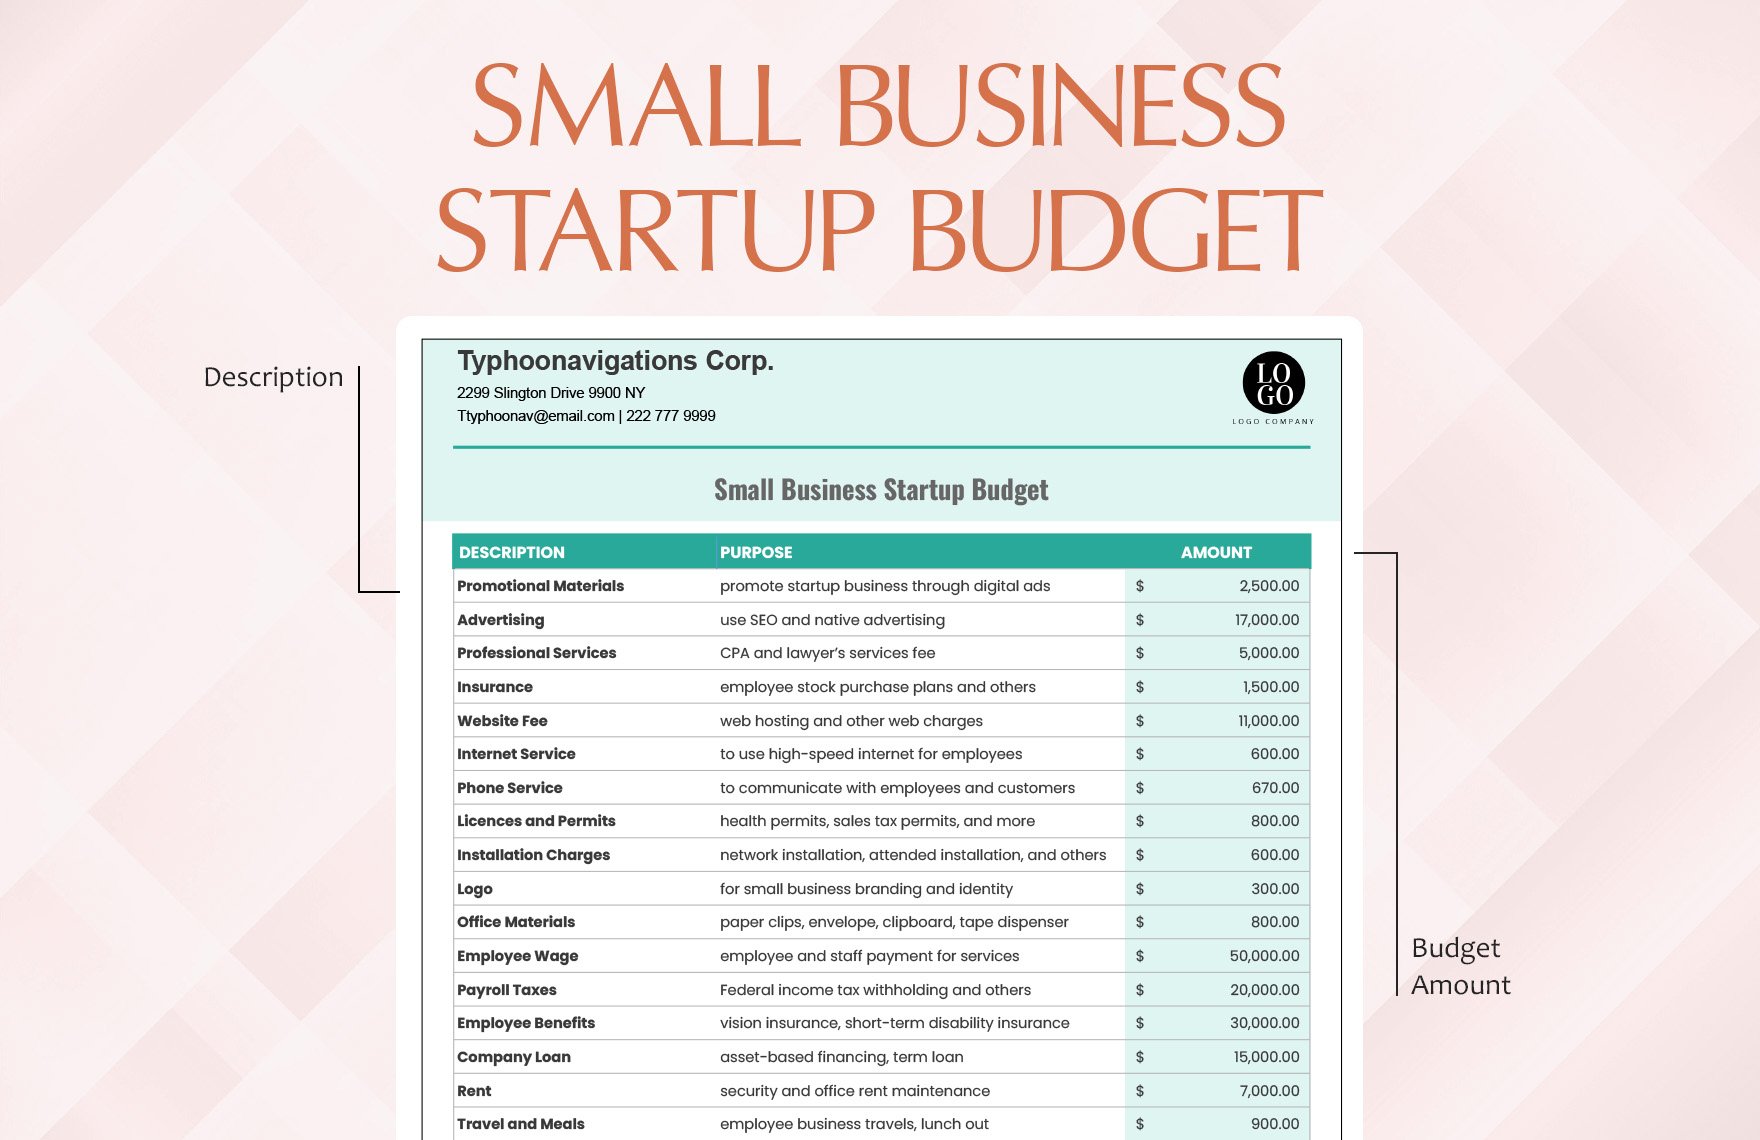 Small Business Startup Budget